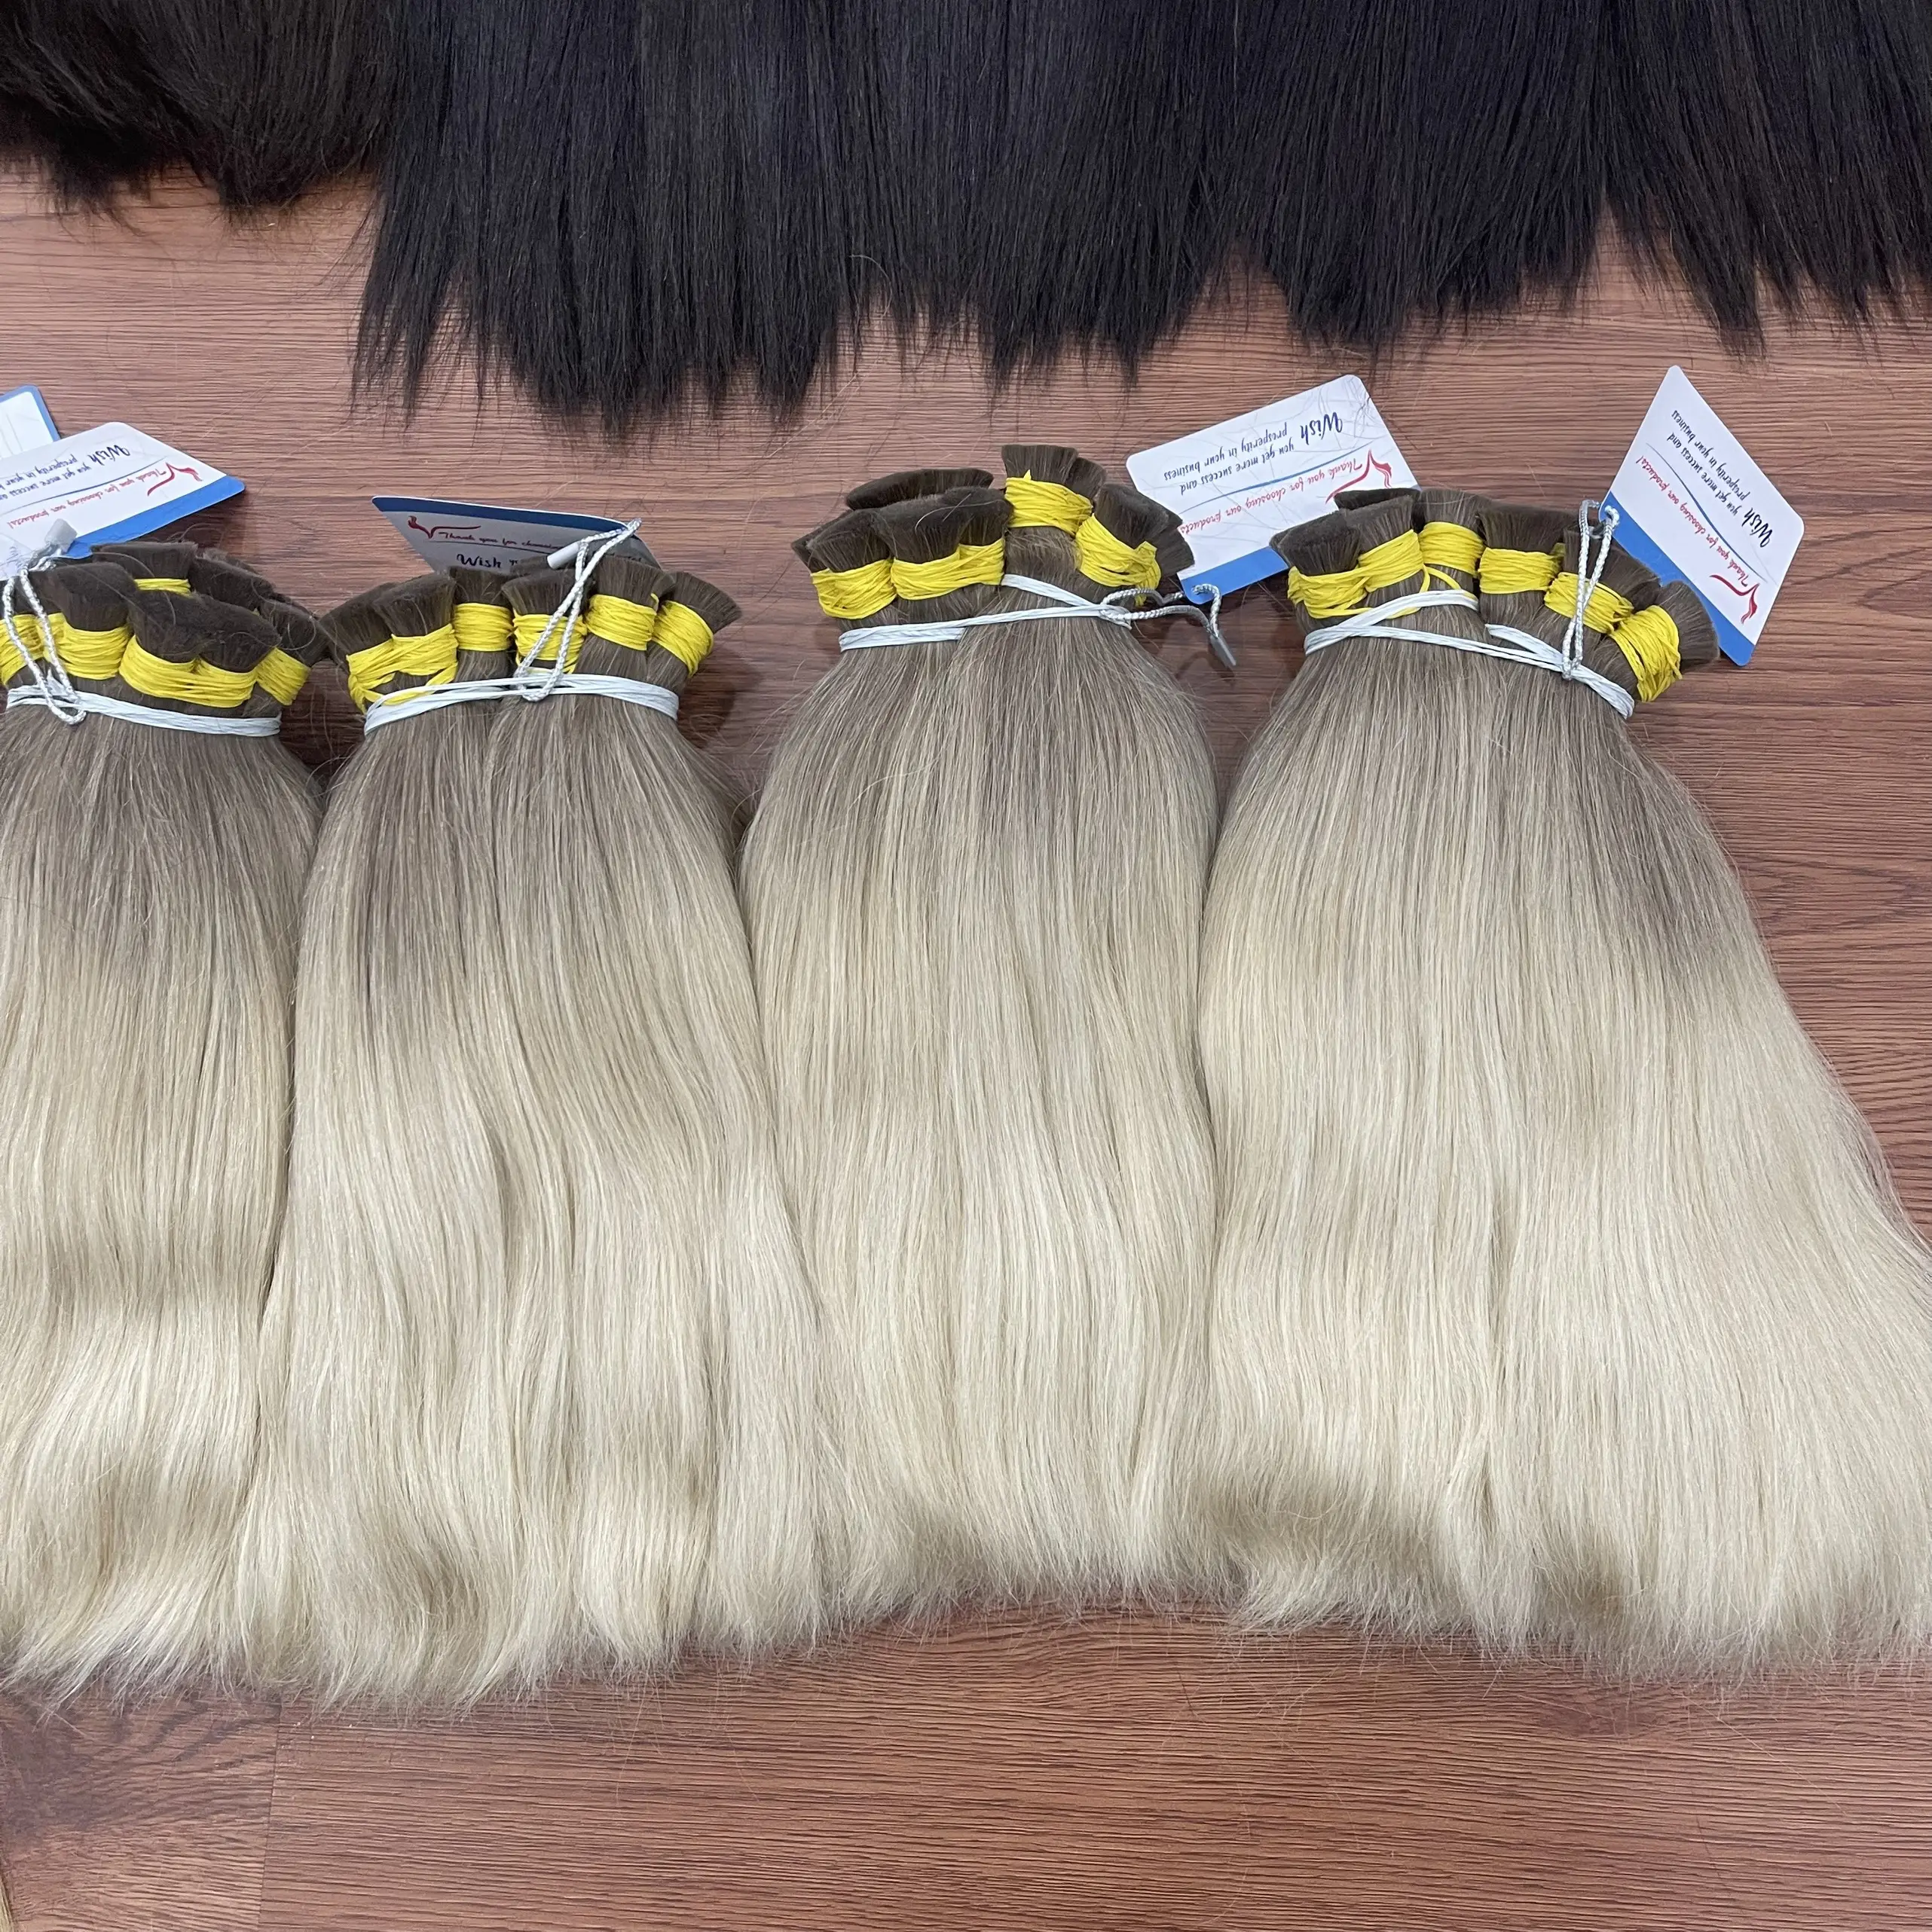 Top quality bulk hair extension Double Drawn Bundle From Vietnamese Hair Extensions super shiny large stock ready to ship